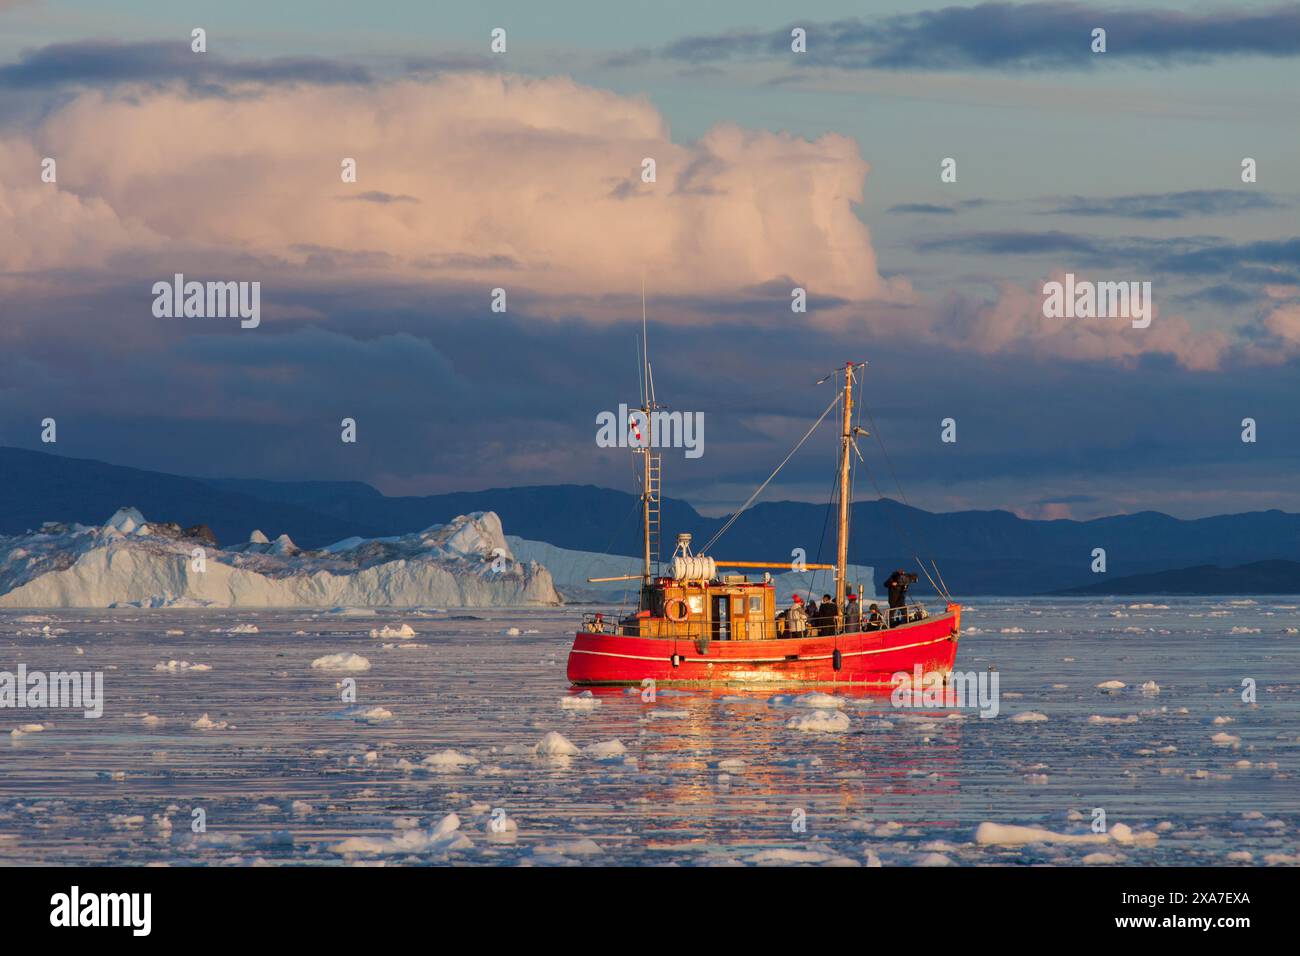 Tourist boat in front of icebergs, Kangia Icefjord, Disko Bay, UNESCO World Heritage Site, West Greenland, Greenland Stock Photo